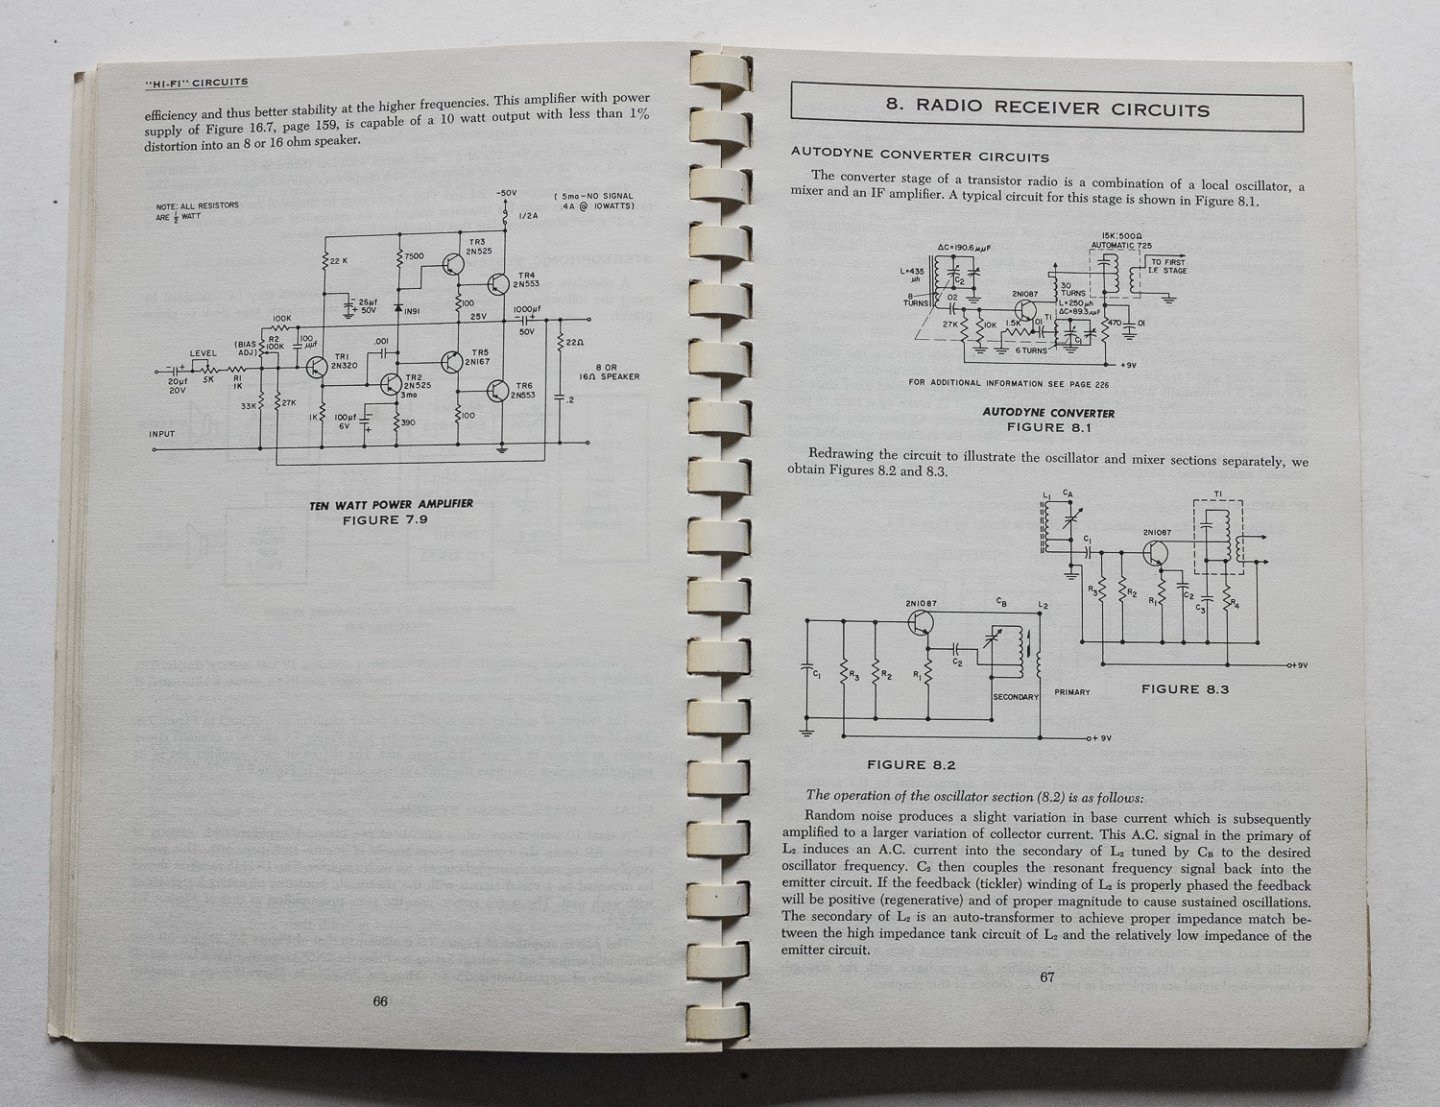 General Electric Company. Semiconductor Products Department - General Electric transistor manual - Circuits, Applications, Specifications